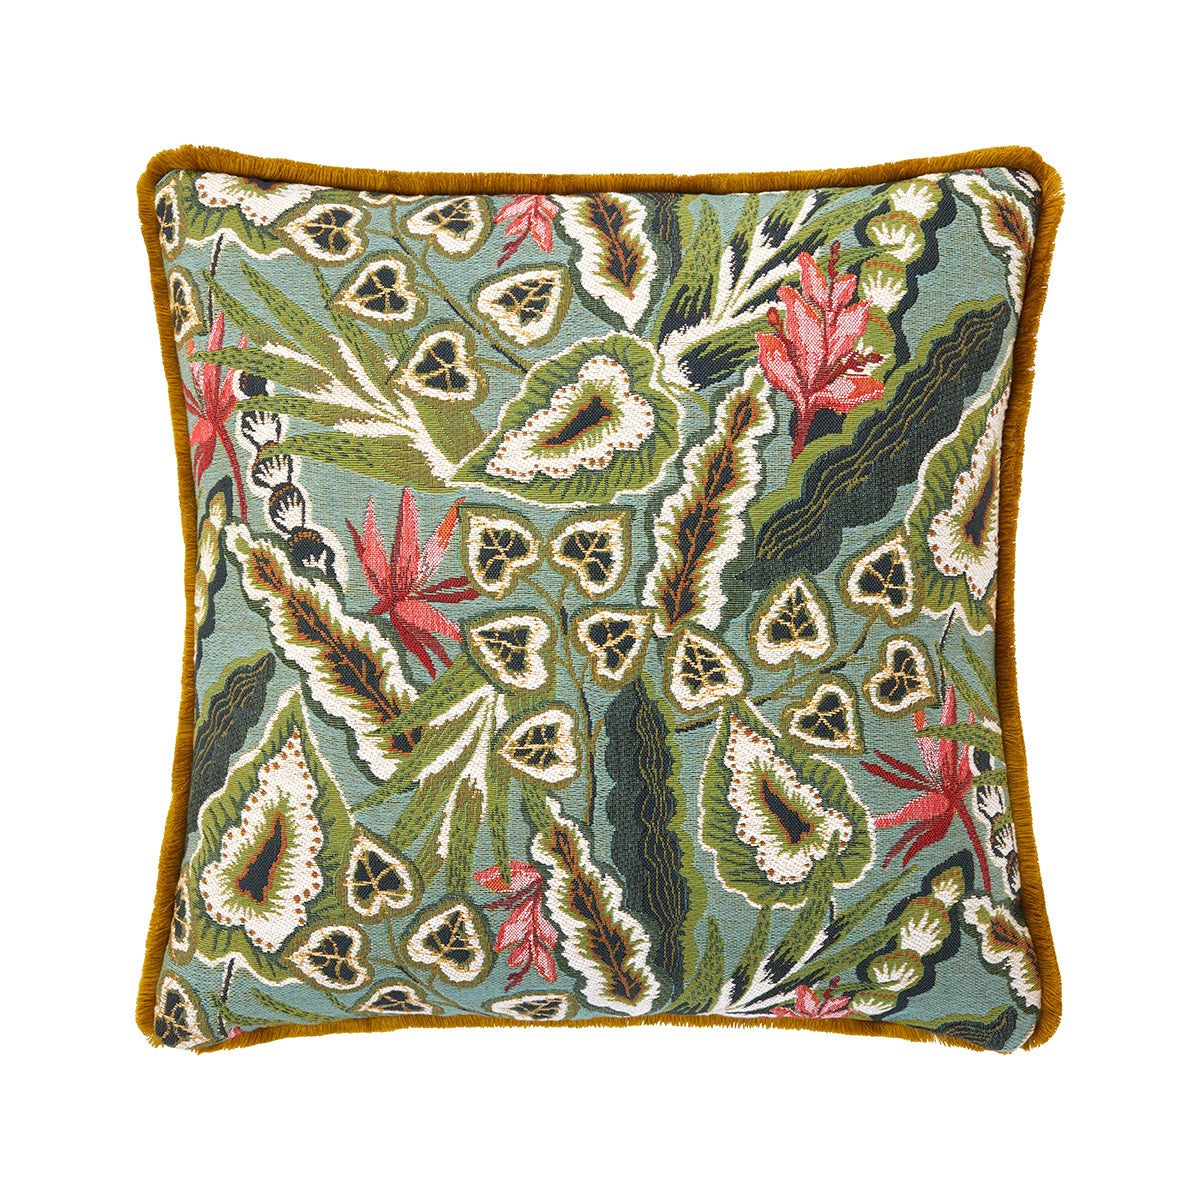 Yves Delorme Bergame - Mousse - Decorative Pillow 18 x 18